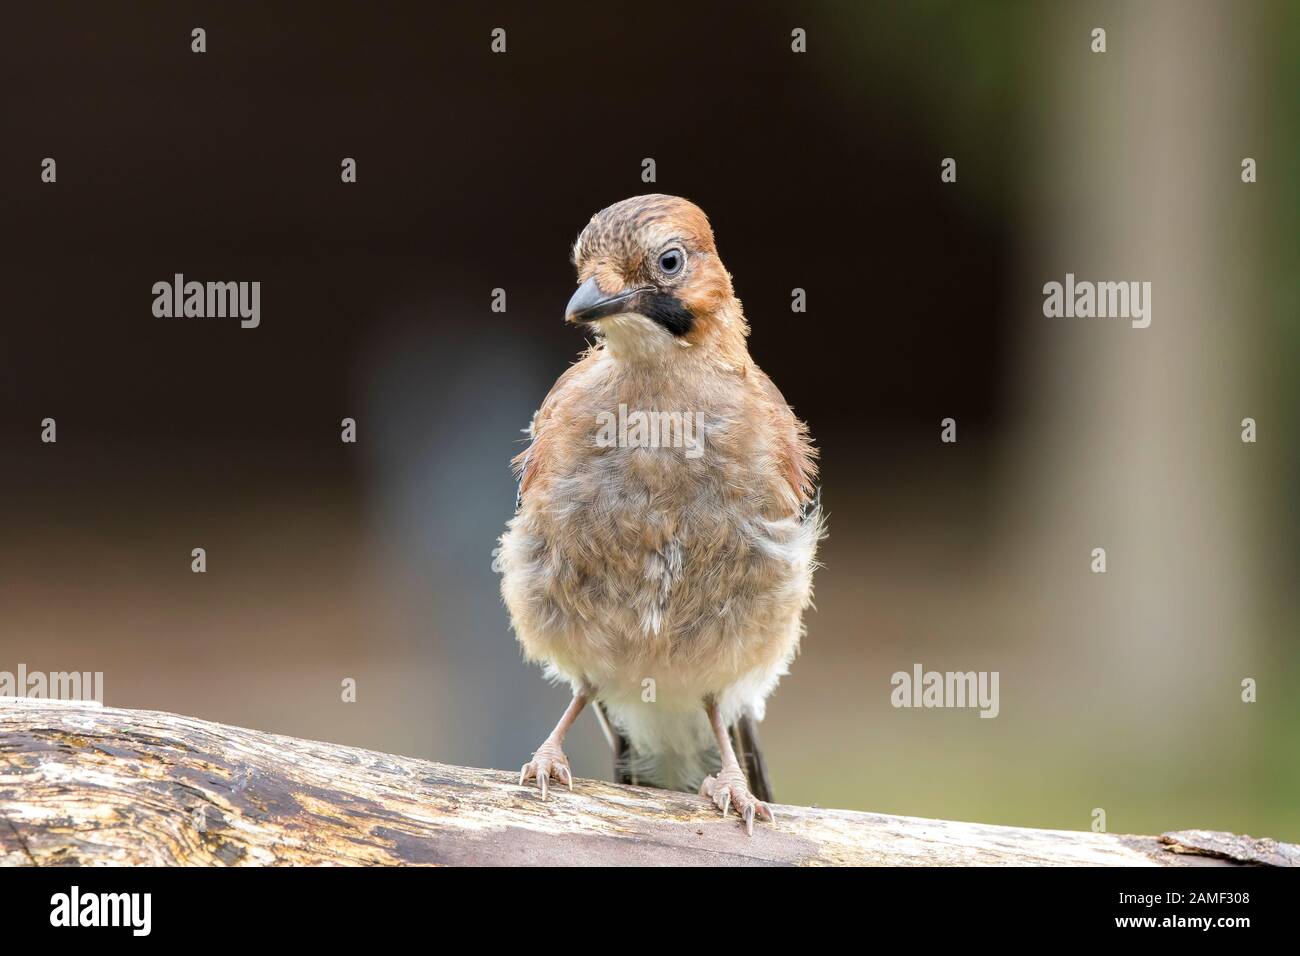 Detailed, front view close up of wild juvenile UK jay bird (Garrulus glandarius) with downy feathers, isolated outdoors perching on log. Stock Photo